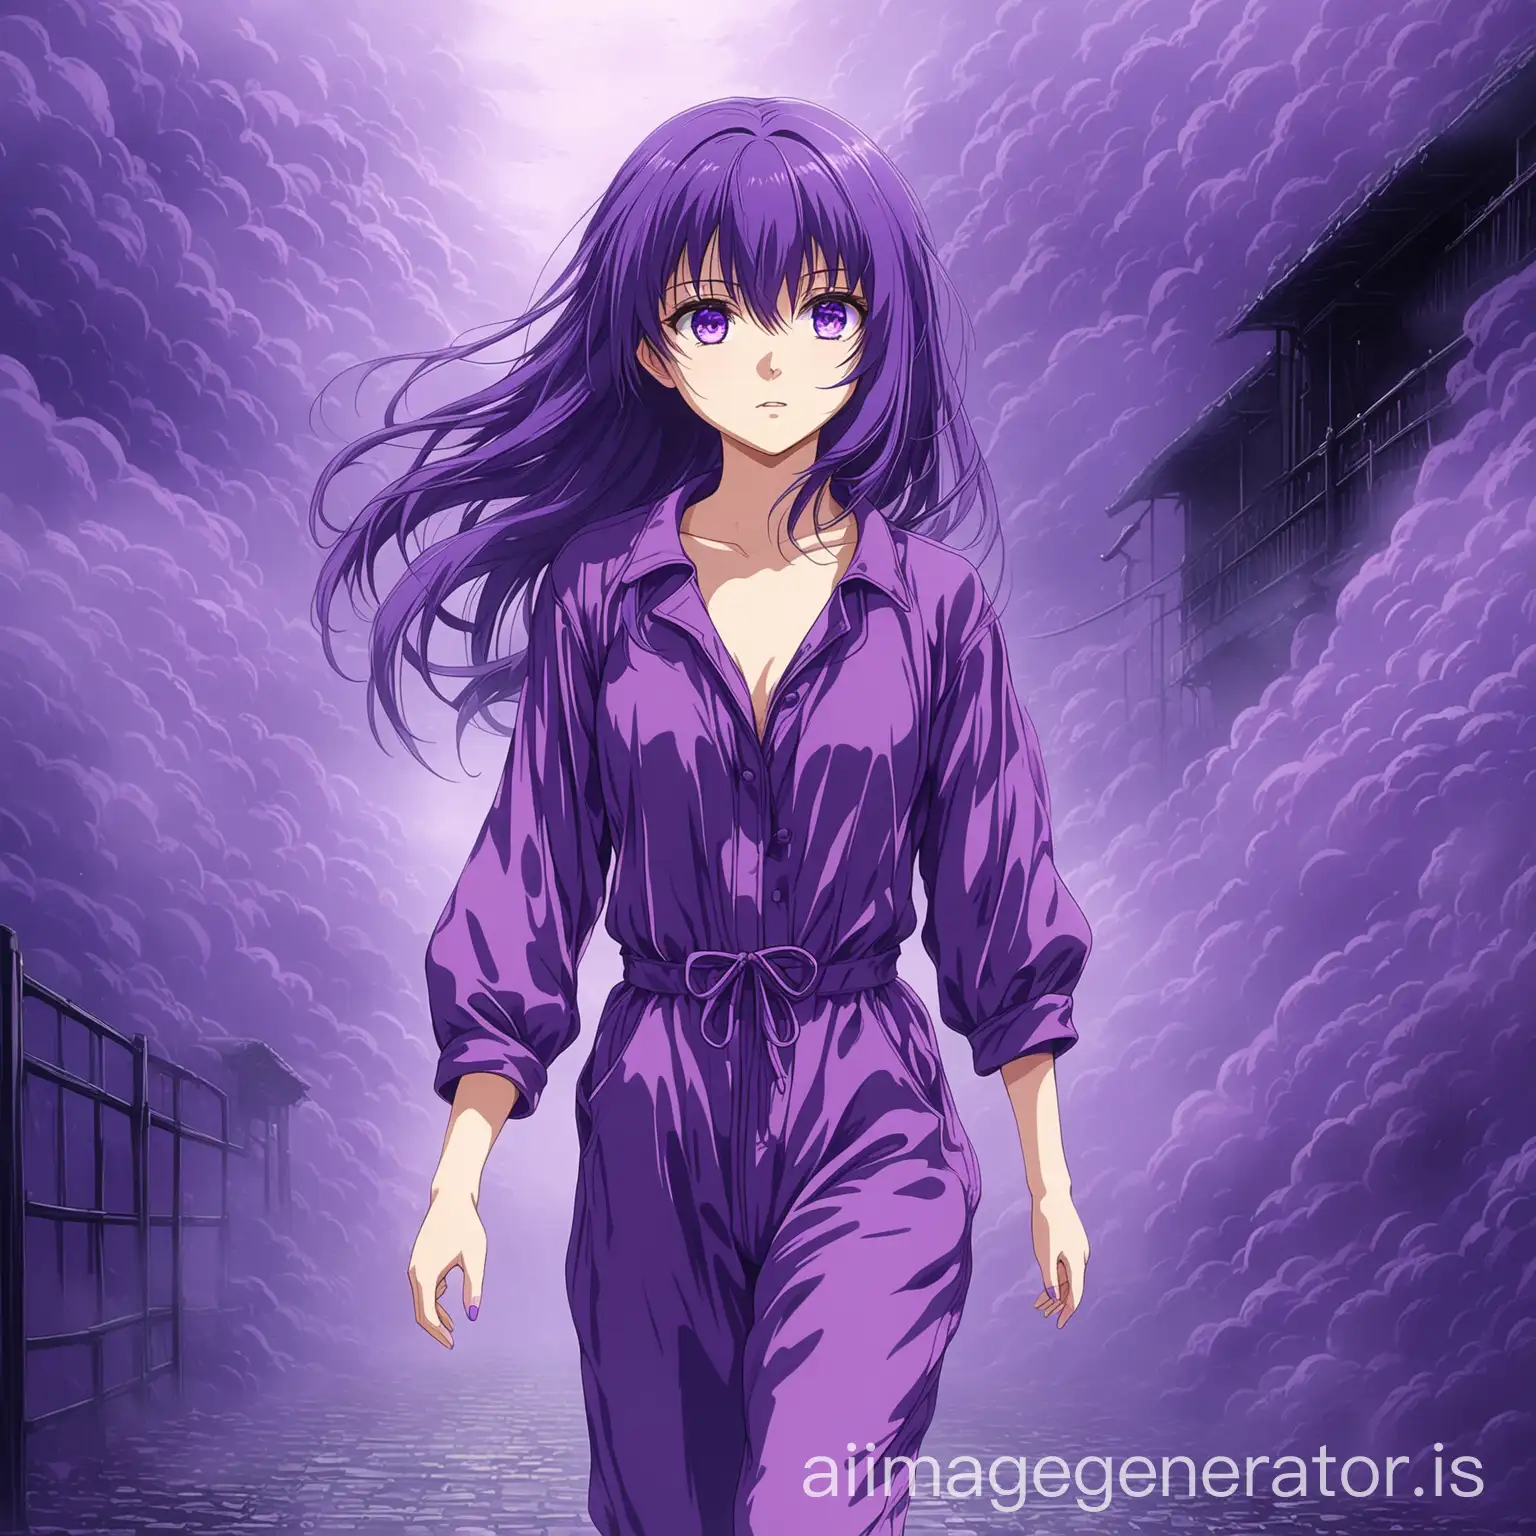 Pretty-Anime-Girl-with-Purple-Hair-and-Eyes-in-a-Stylish-Jumpsuit-Walking-in-a-Misty-Purple-Environment